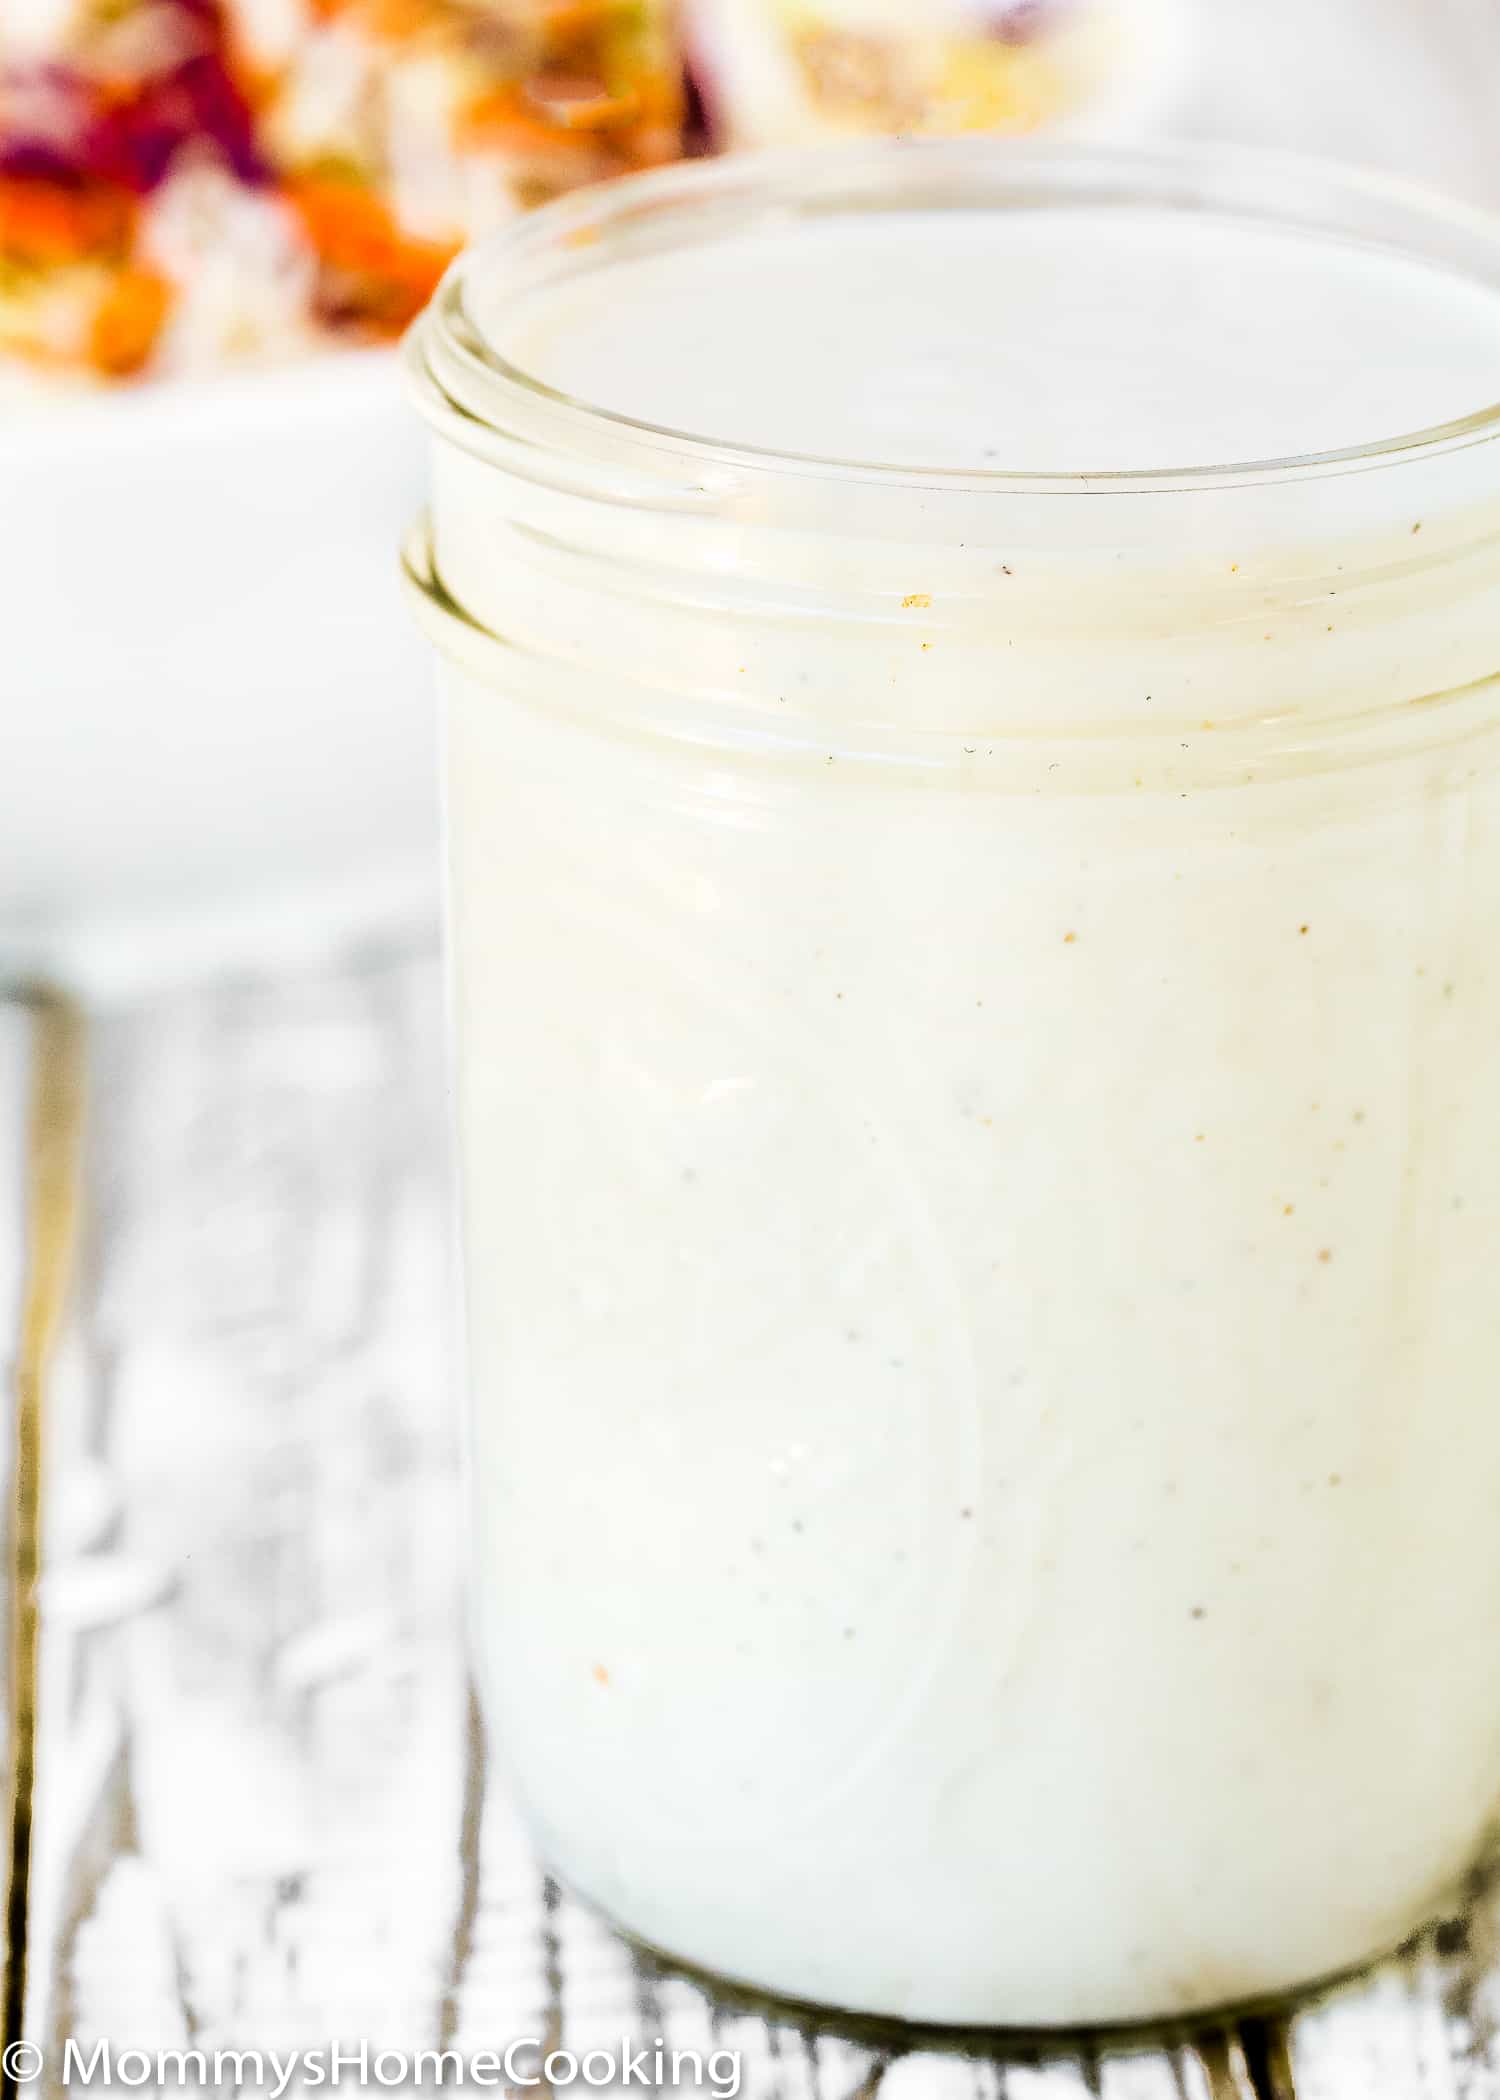 This Buttermilk Salad Dressing is quick, simple, creamy and epically delicious!! Perfect to dress coleslaw, mixed greens, cold pasta salads, steamed broccoli or asparagus spears, as a dip for crunchy vegetables, chips, or sweet potato fries. So much better than any store-bought dressing. https://mommyshomecooking.com